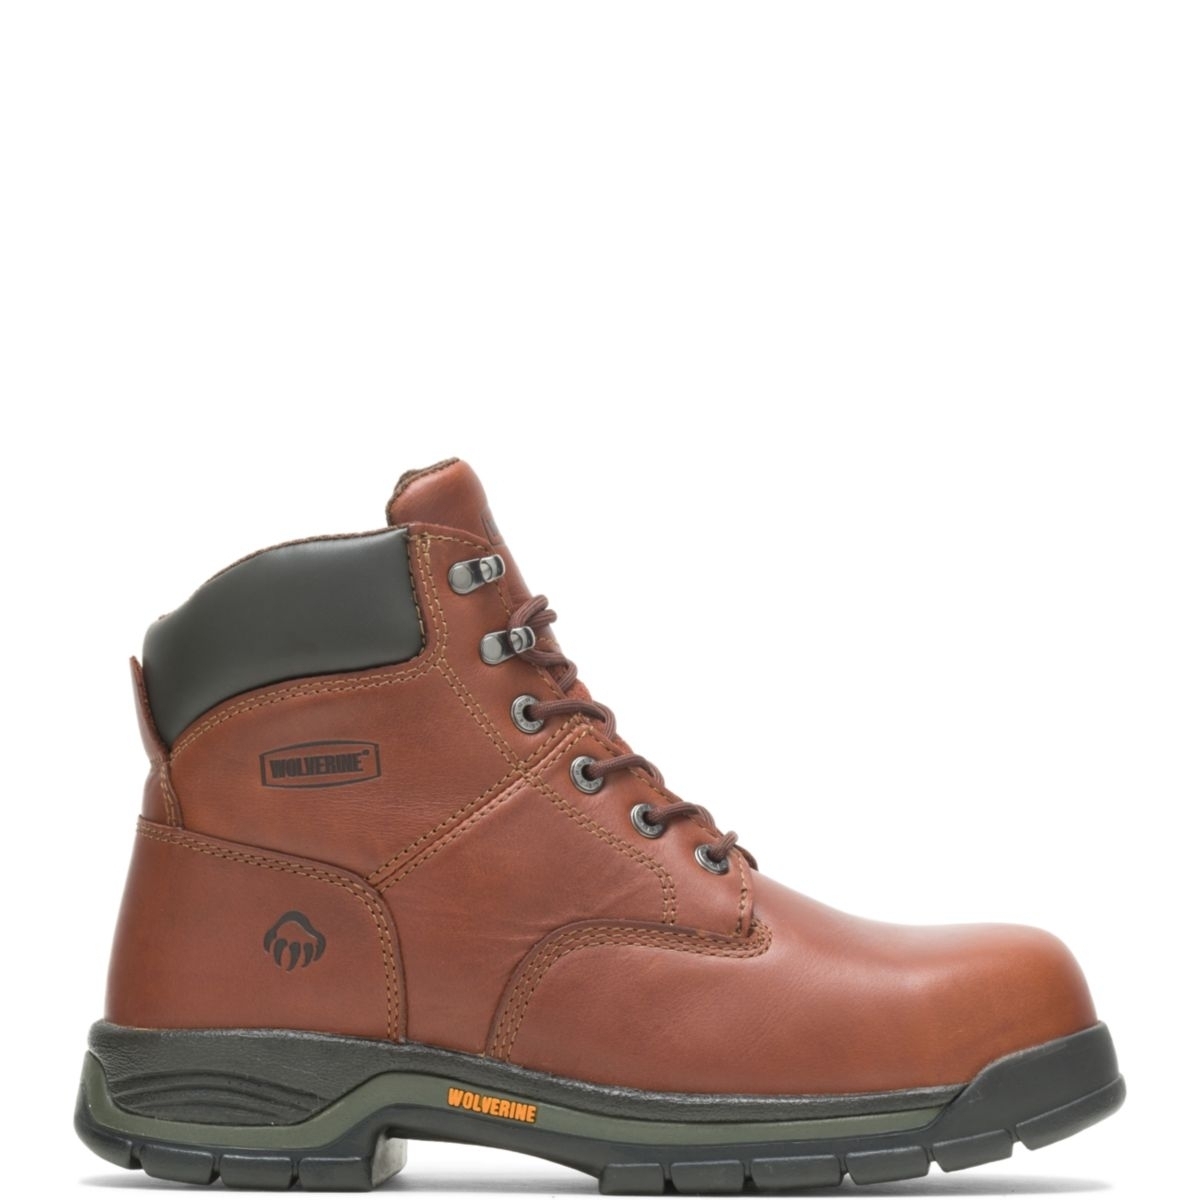 WOLVERINE Men's Harrison 6 Lace-Up SoftToe Work Boot Brown - W04906 Varies BROWN - BROWN, 10.5